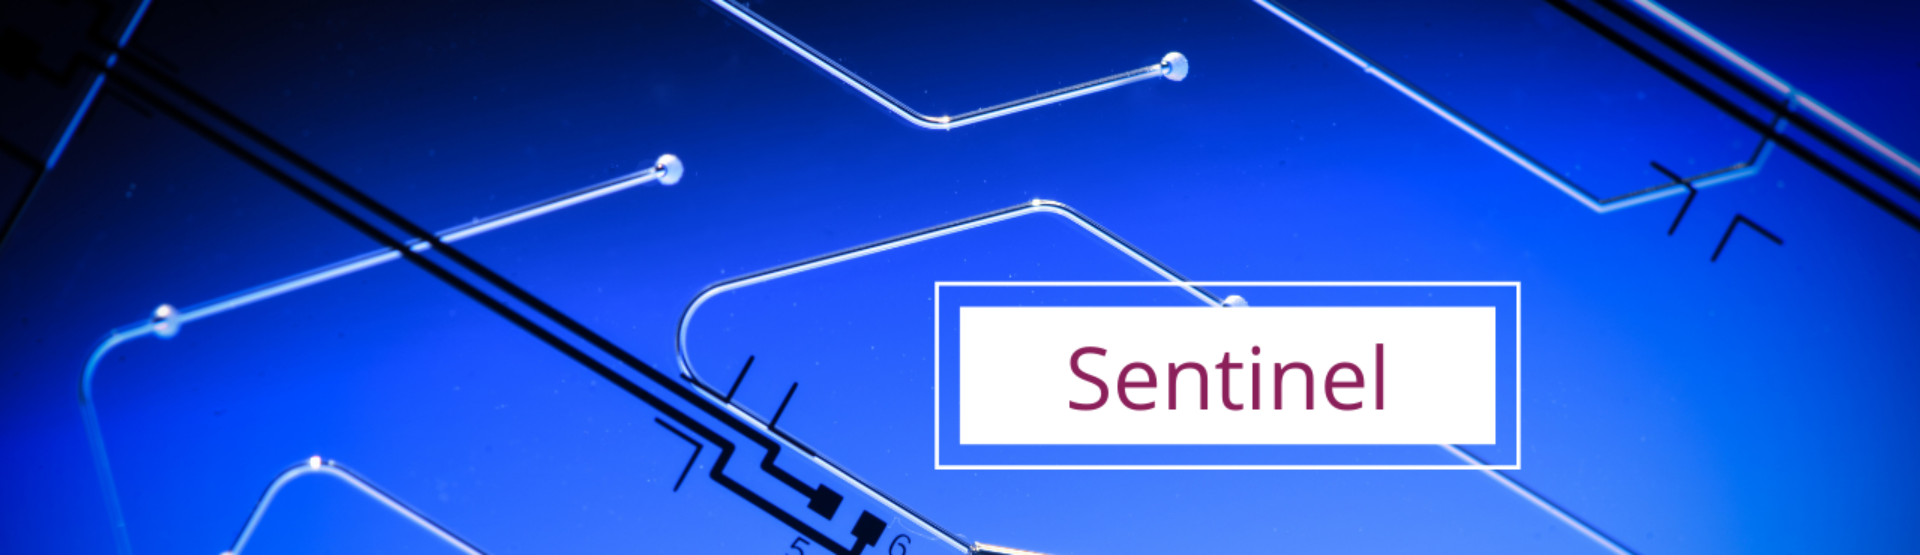 sentinel research project